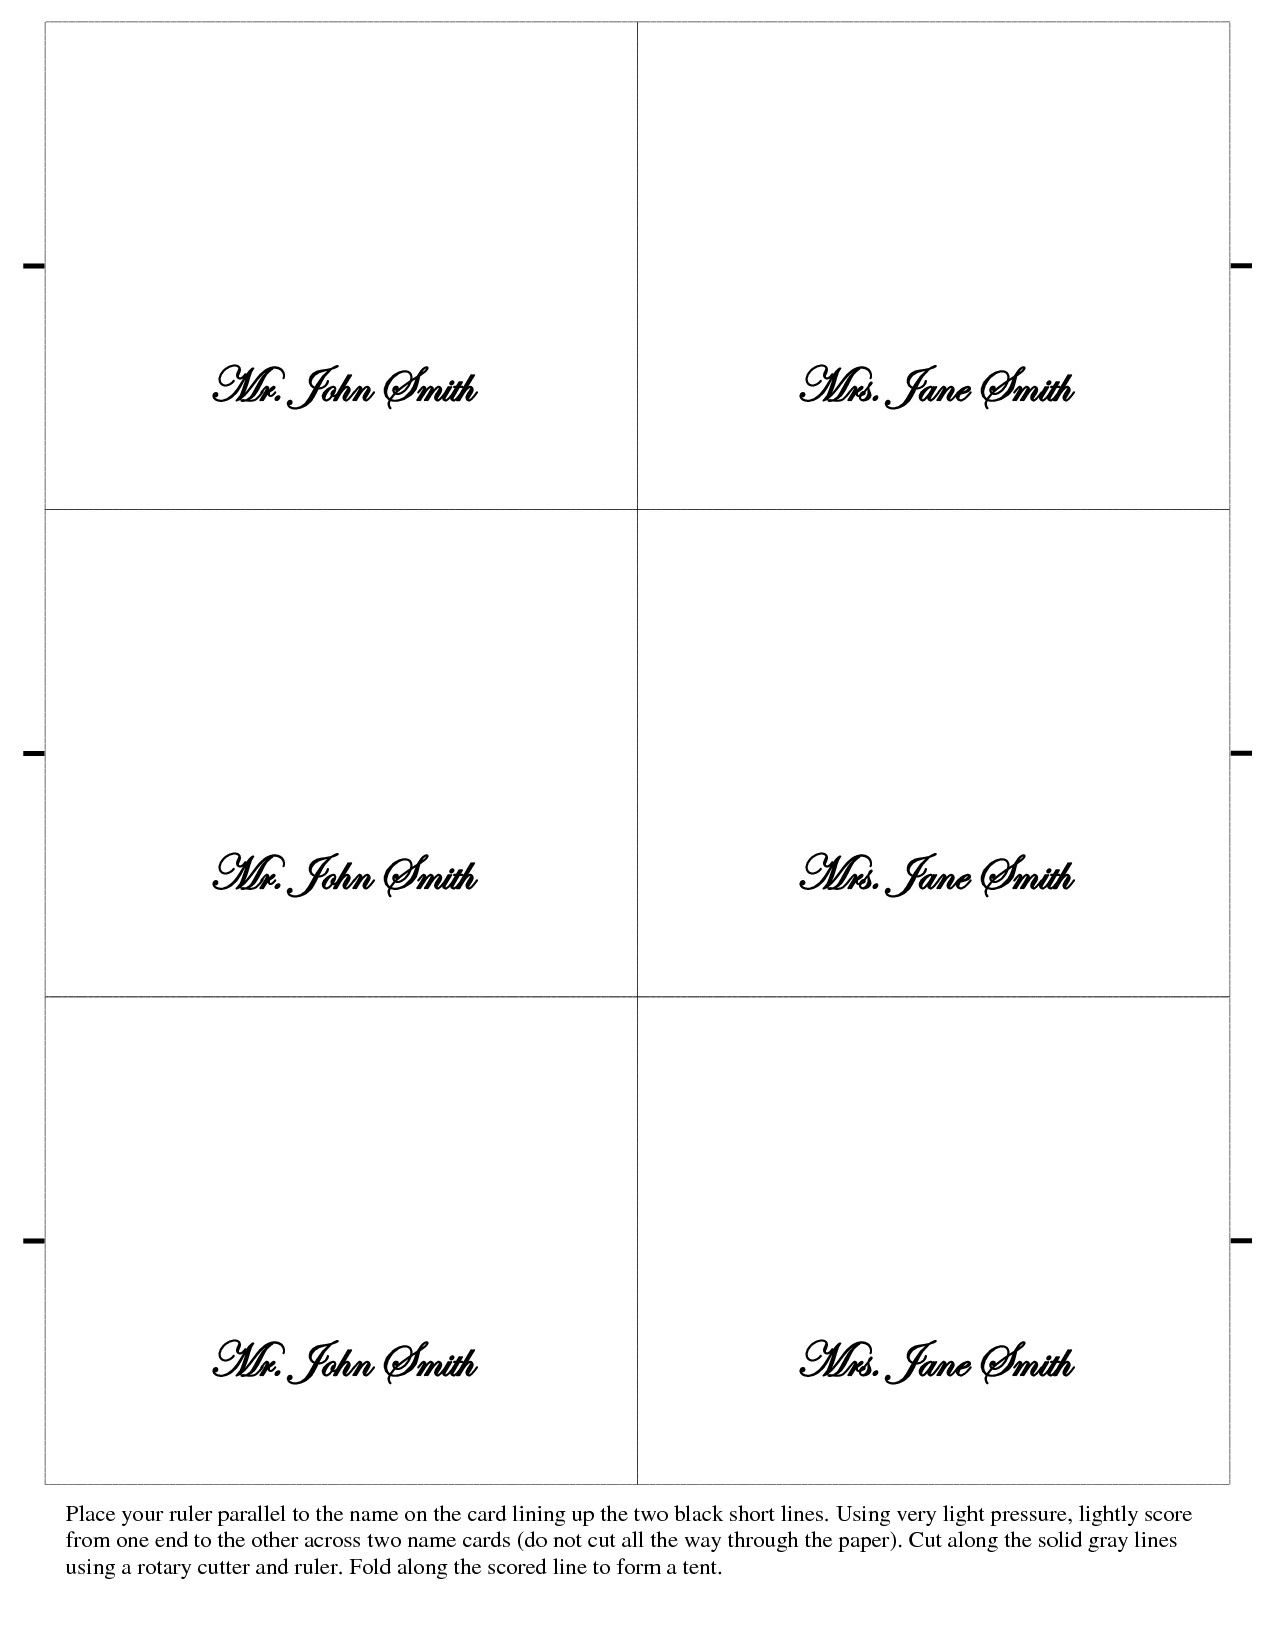 Blank Place Cards Luxmove Pro Card Template Free Download Intended For Free Place Card Templates Download